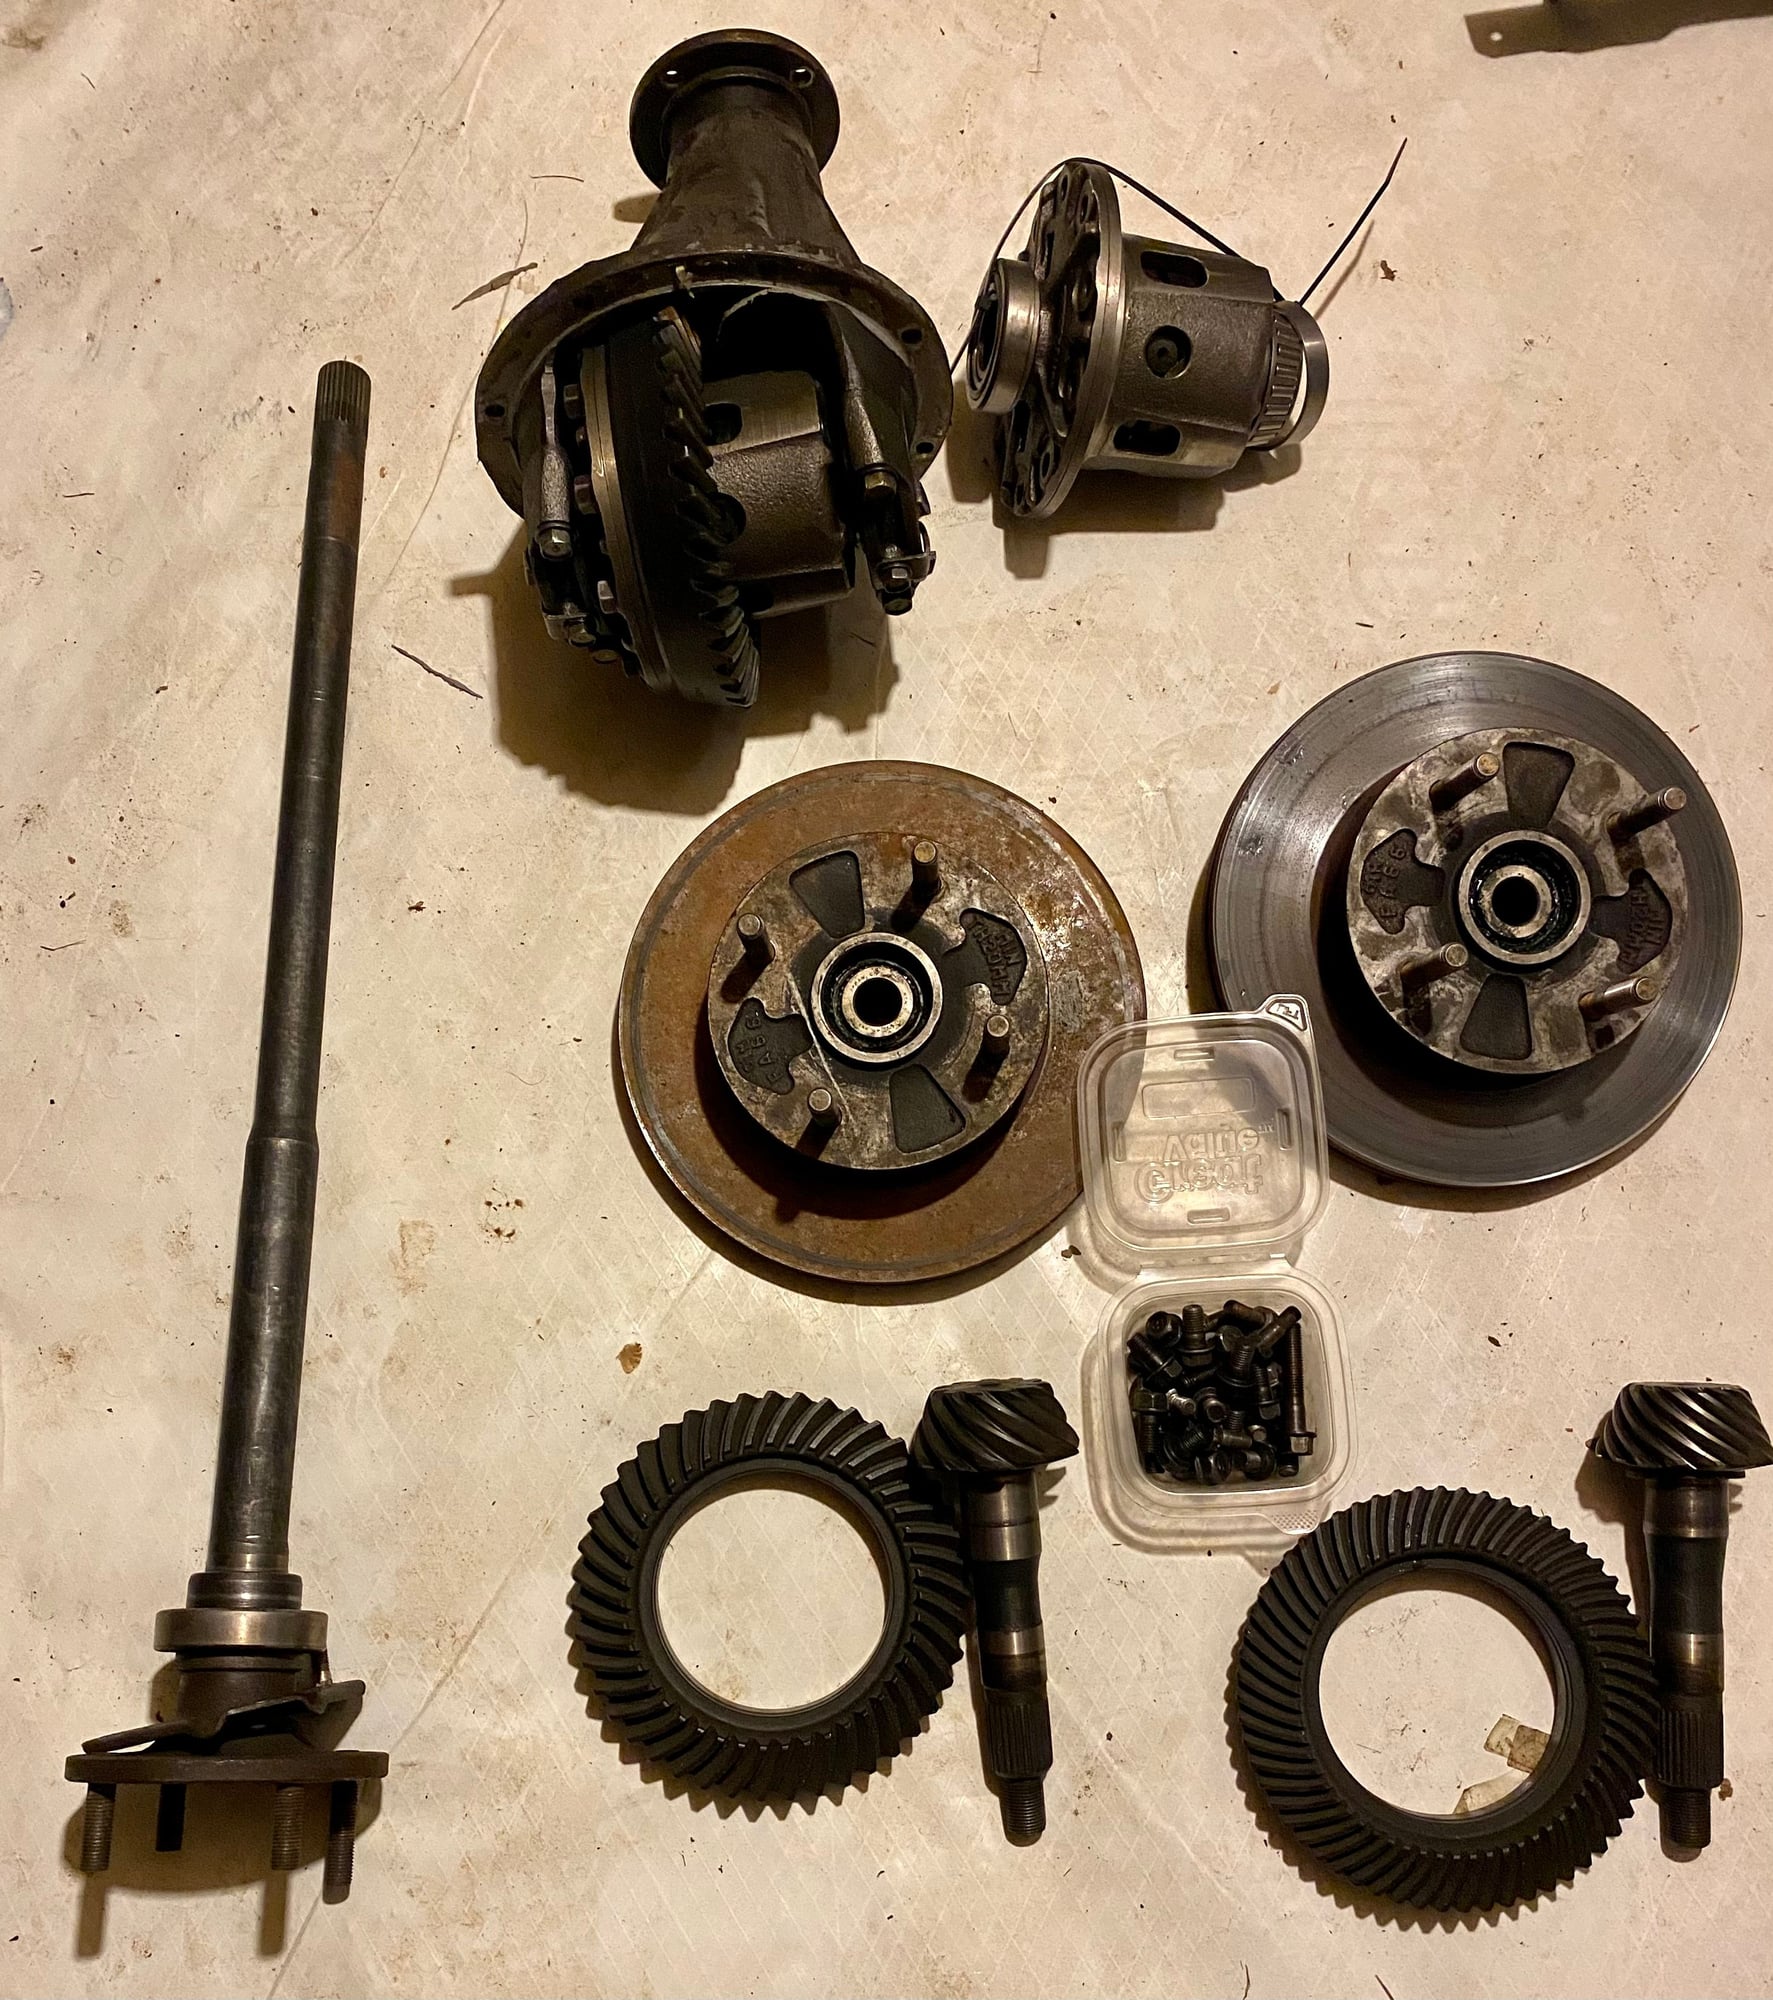 Drivetrain - Used FB, FC, and RX-8 Parts For Sale - Used - 1982 to 1985 Mazda RX-7 - Athens, AL 35620, United States